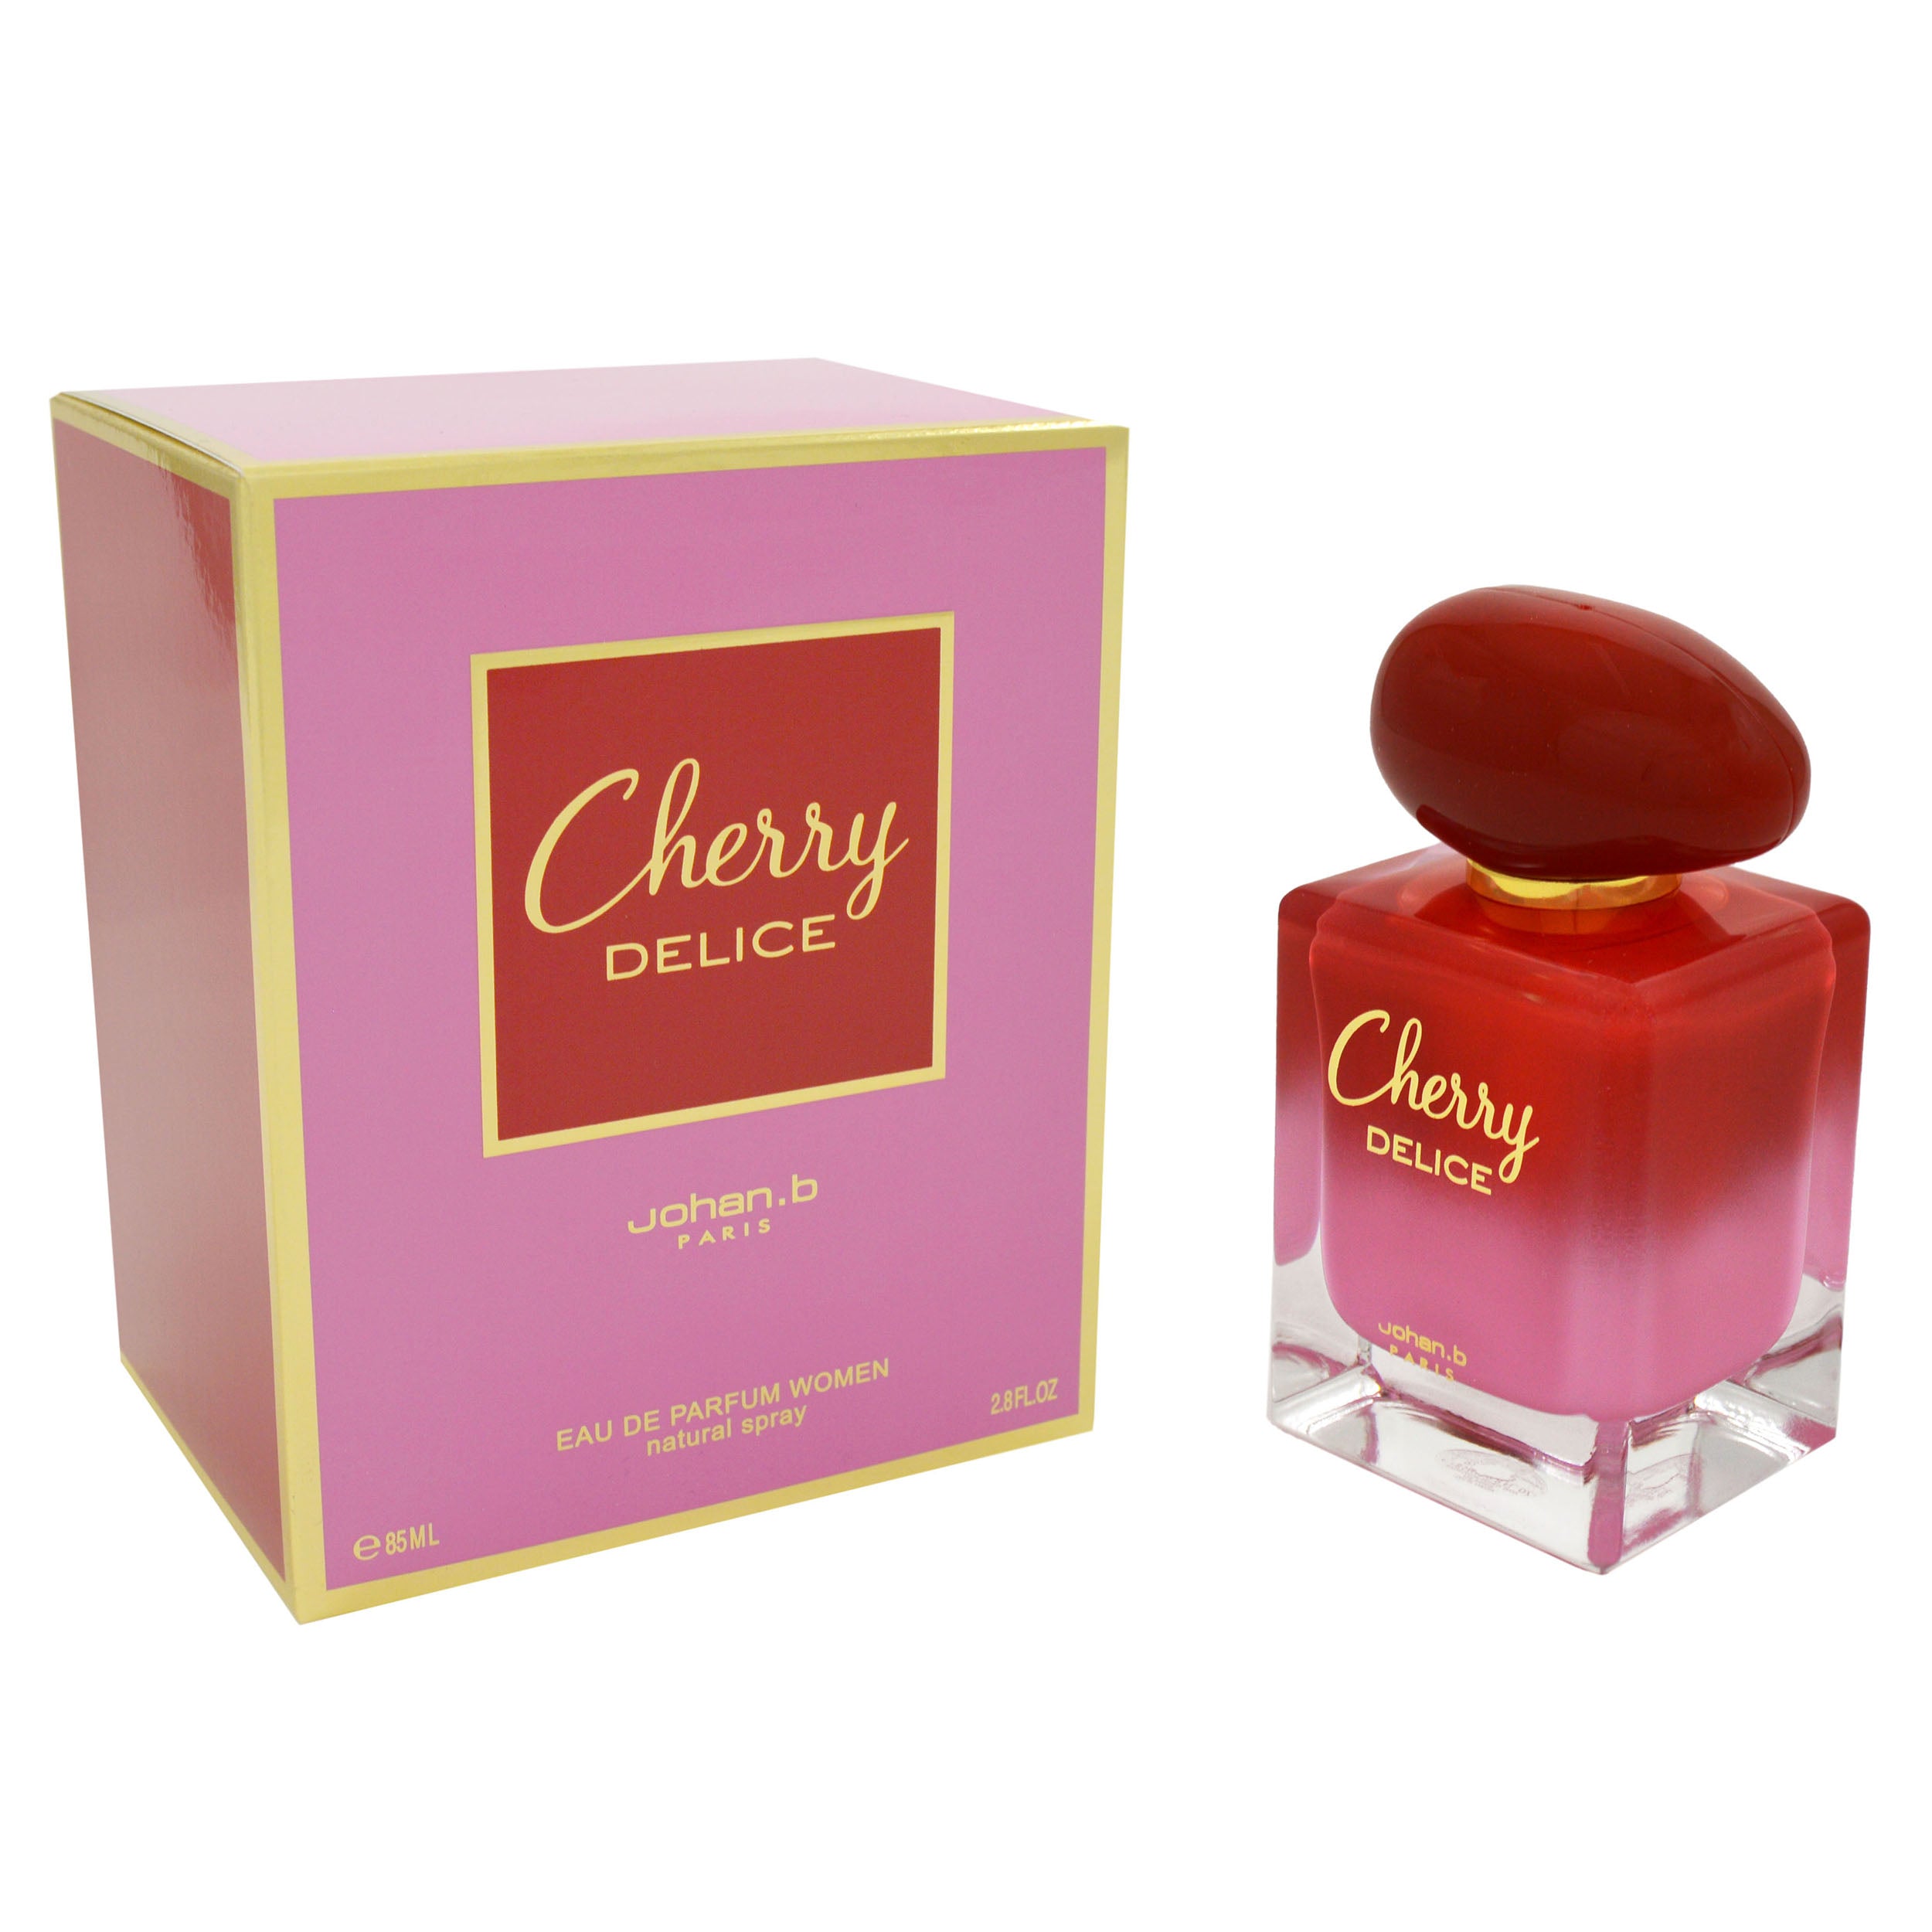 <span data-mce-fragment="1">Cherry Delice by Johan.B is a floral fruity fragrance for daytime use. With its cocktail sweet opening of dazzling bergamot, strawberry and orange against a floral heart, Cherry Delice closes with amber, musk and vanilla for this flirty fragrance.</span>